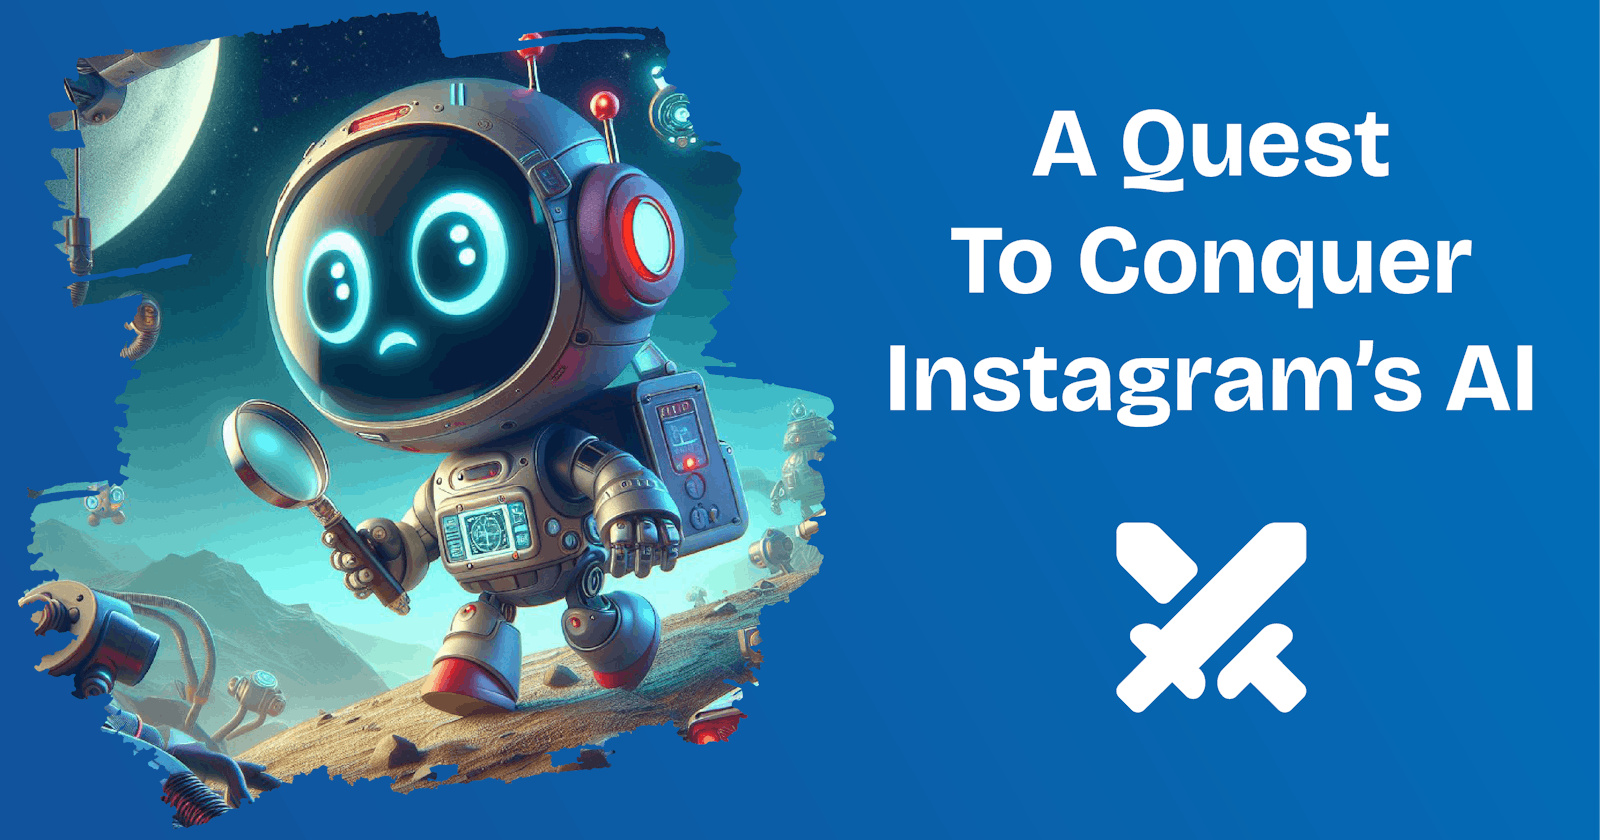 A Quest To Conquer Instagram’s AI and Automate User Interactions!